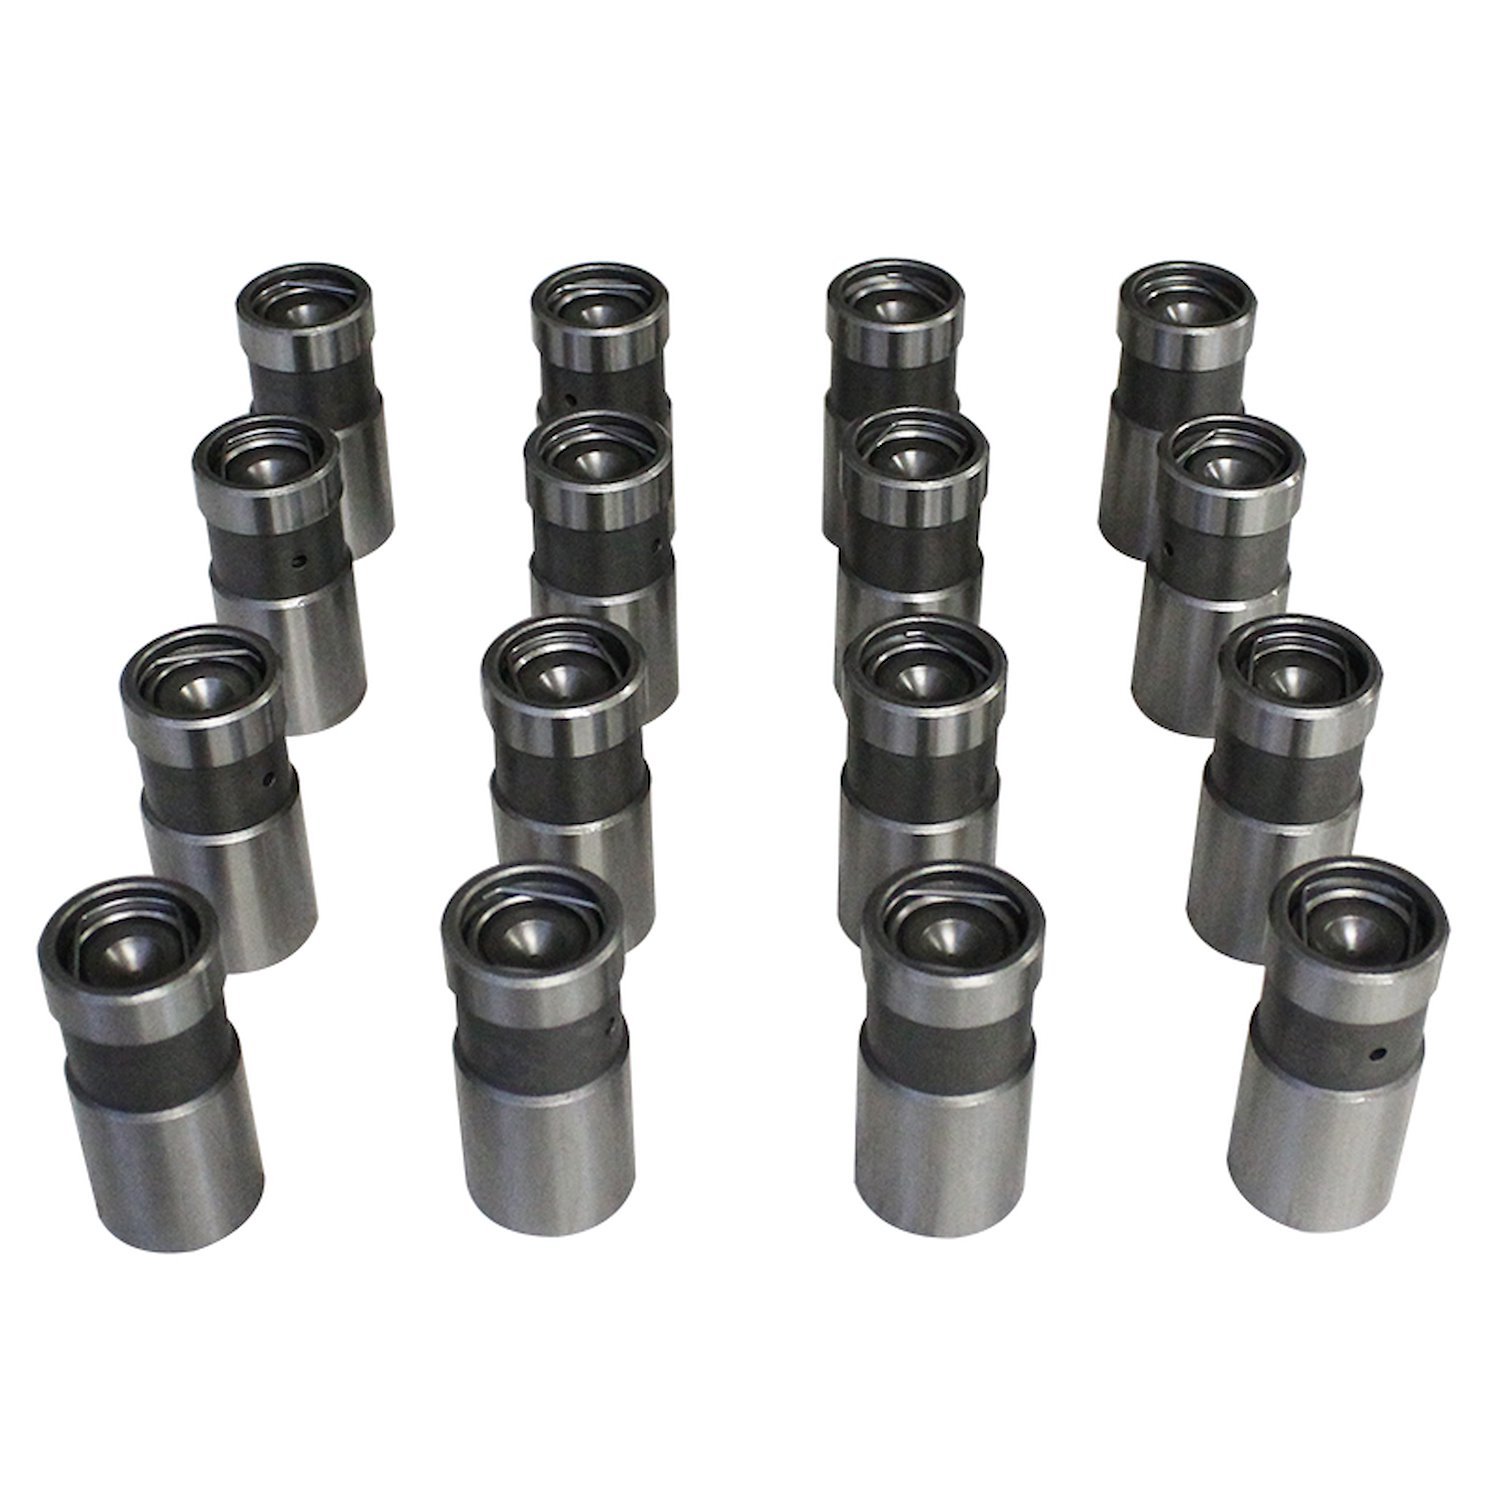 Performance Hydraulic Flat Tappet Lifter Set Ford FE 332-428